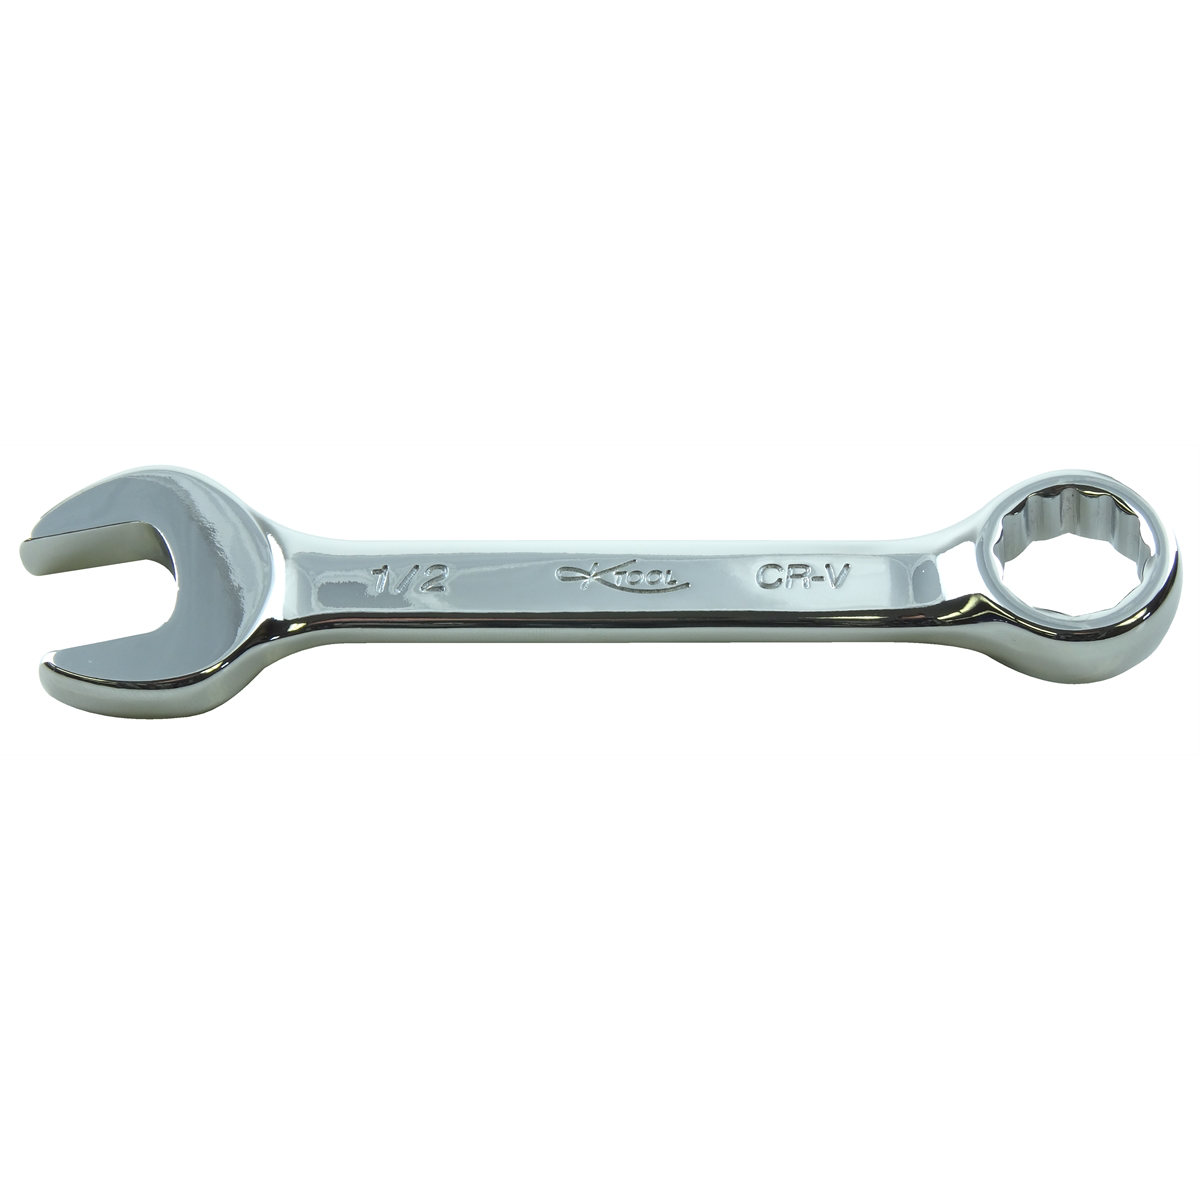 12 Point Short Panel High Polish Combination Wrench, 1/2"